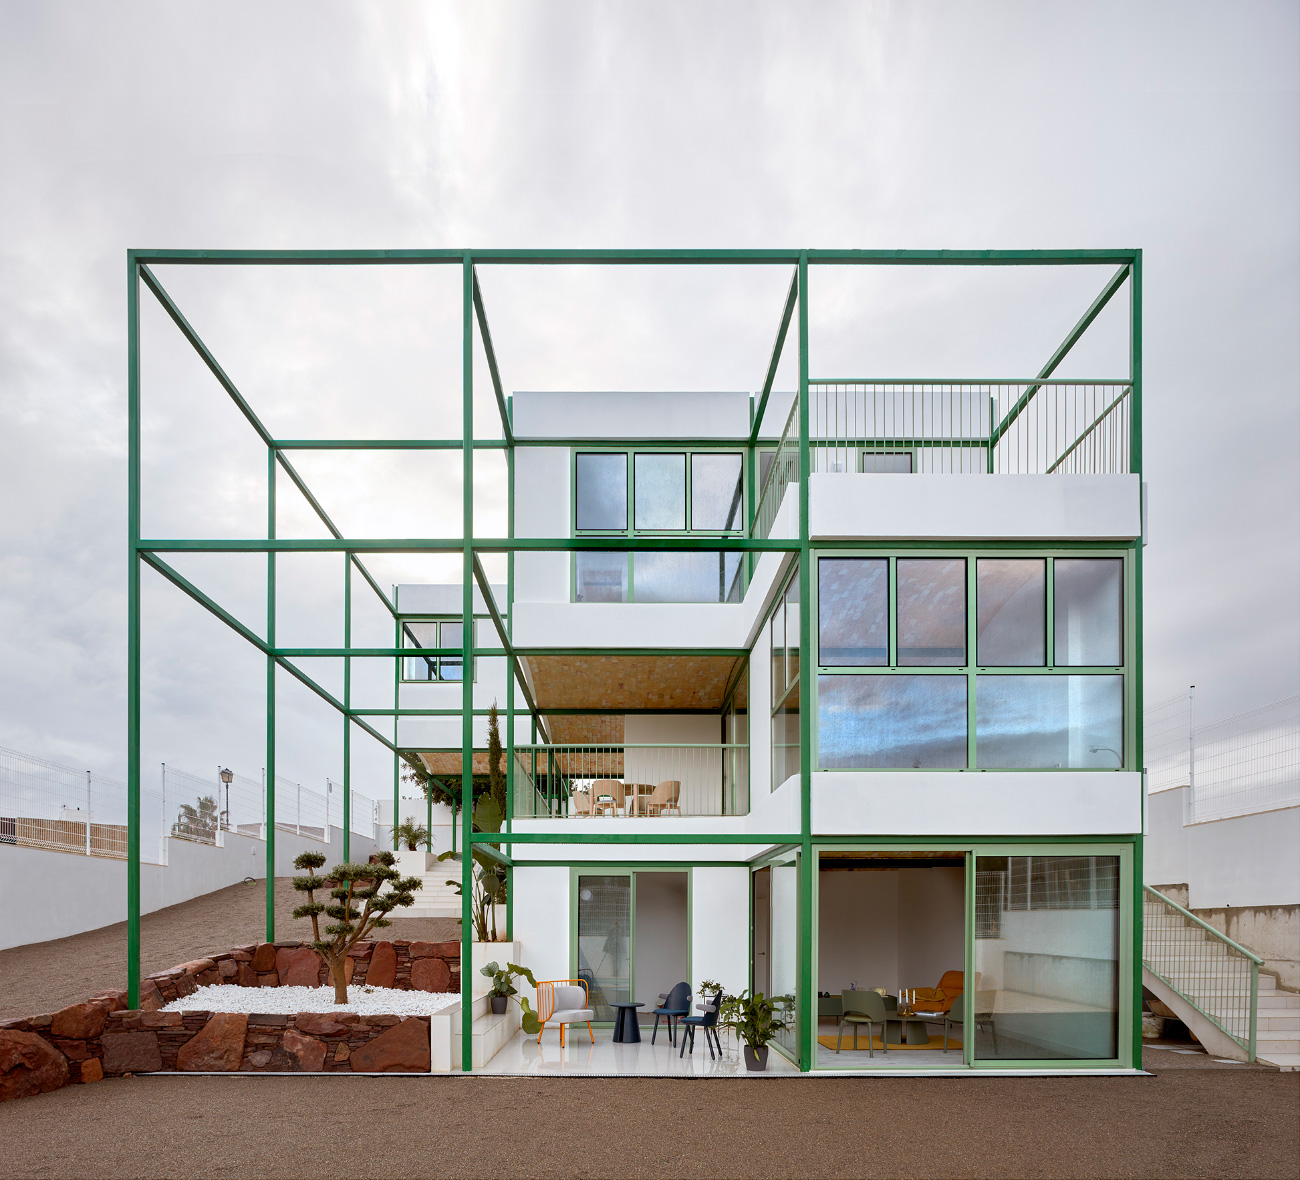 A home with a green metal grid surrounding it, designed by Space Popular